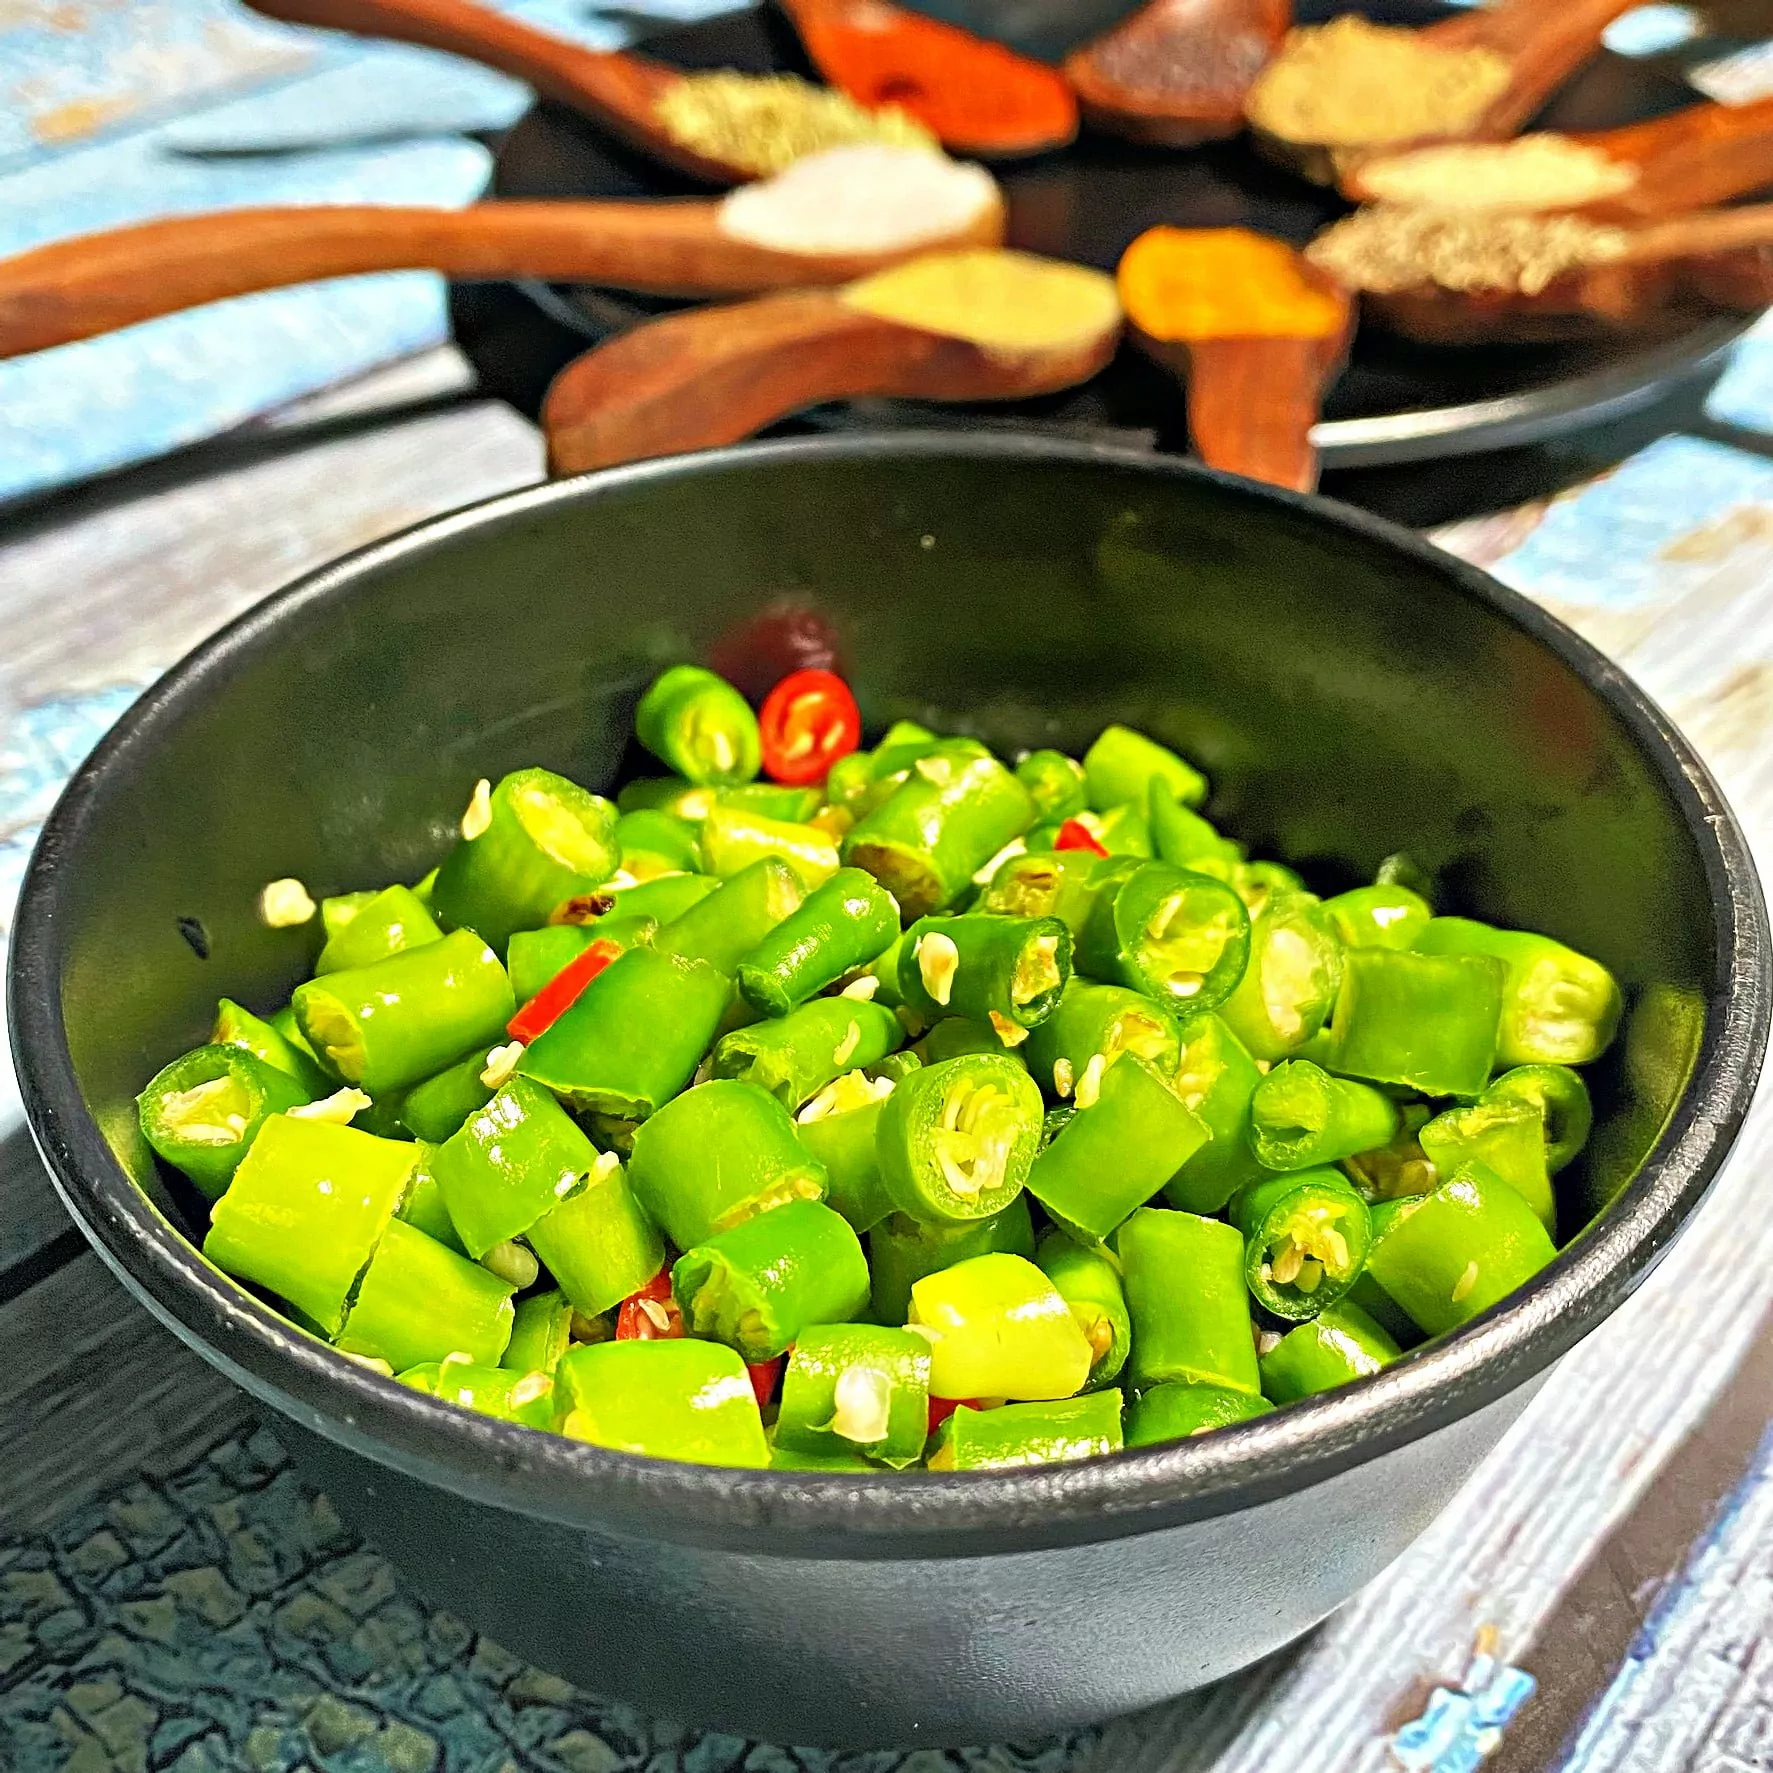 chopped green chillies, indian spices